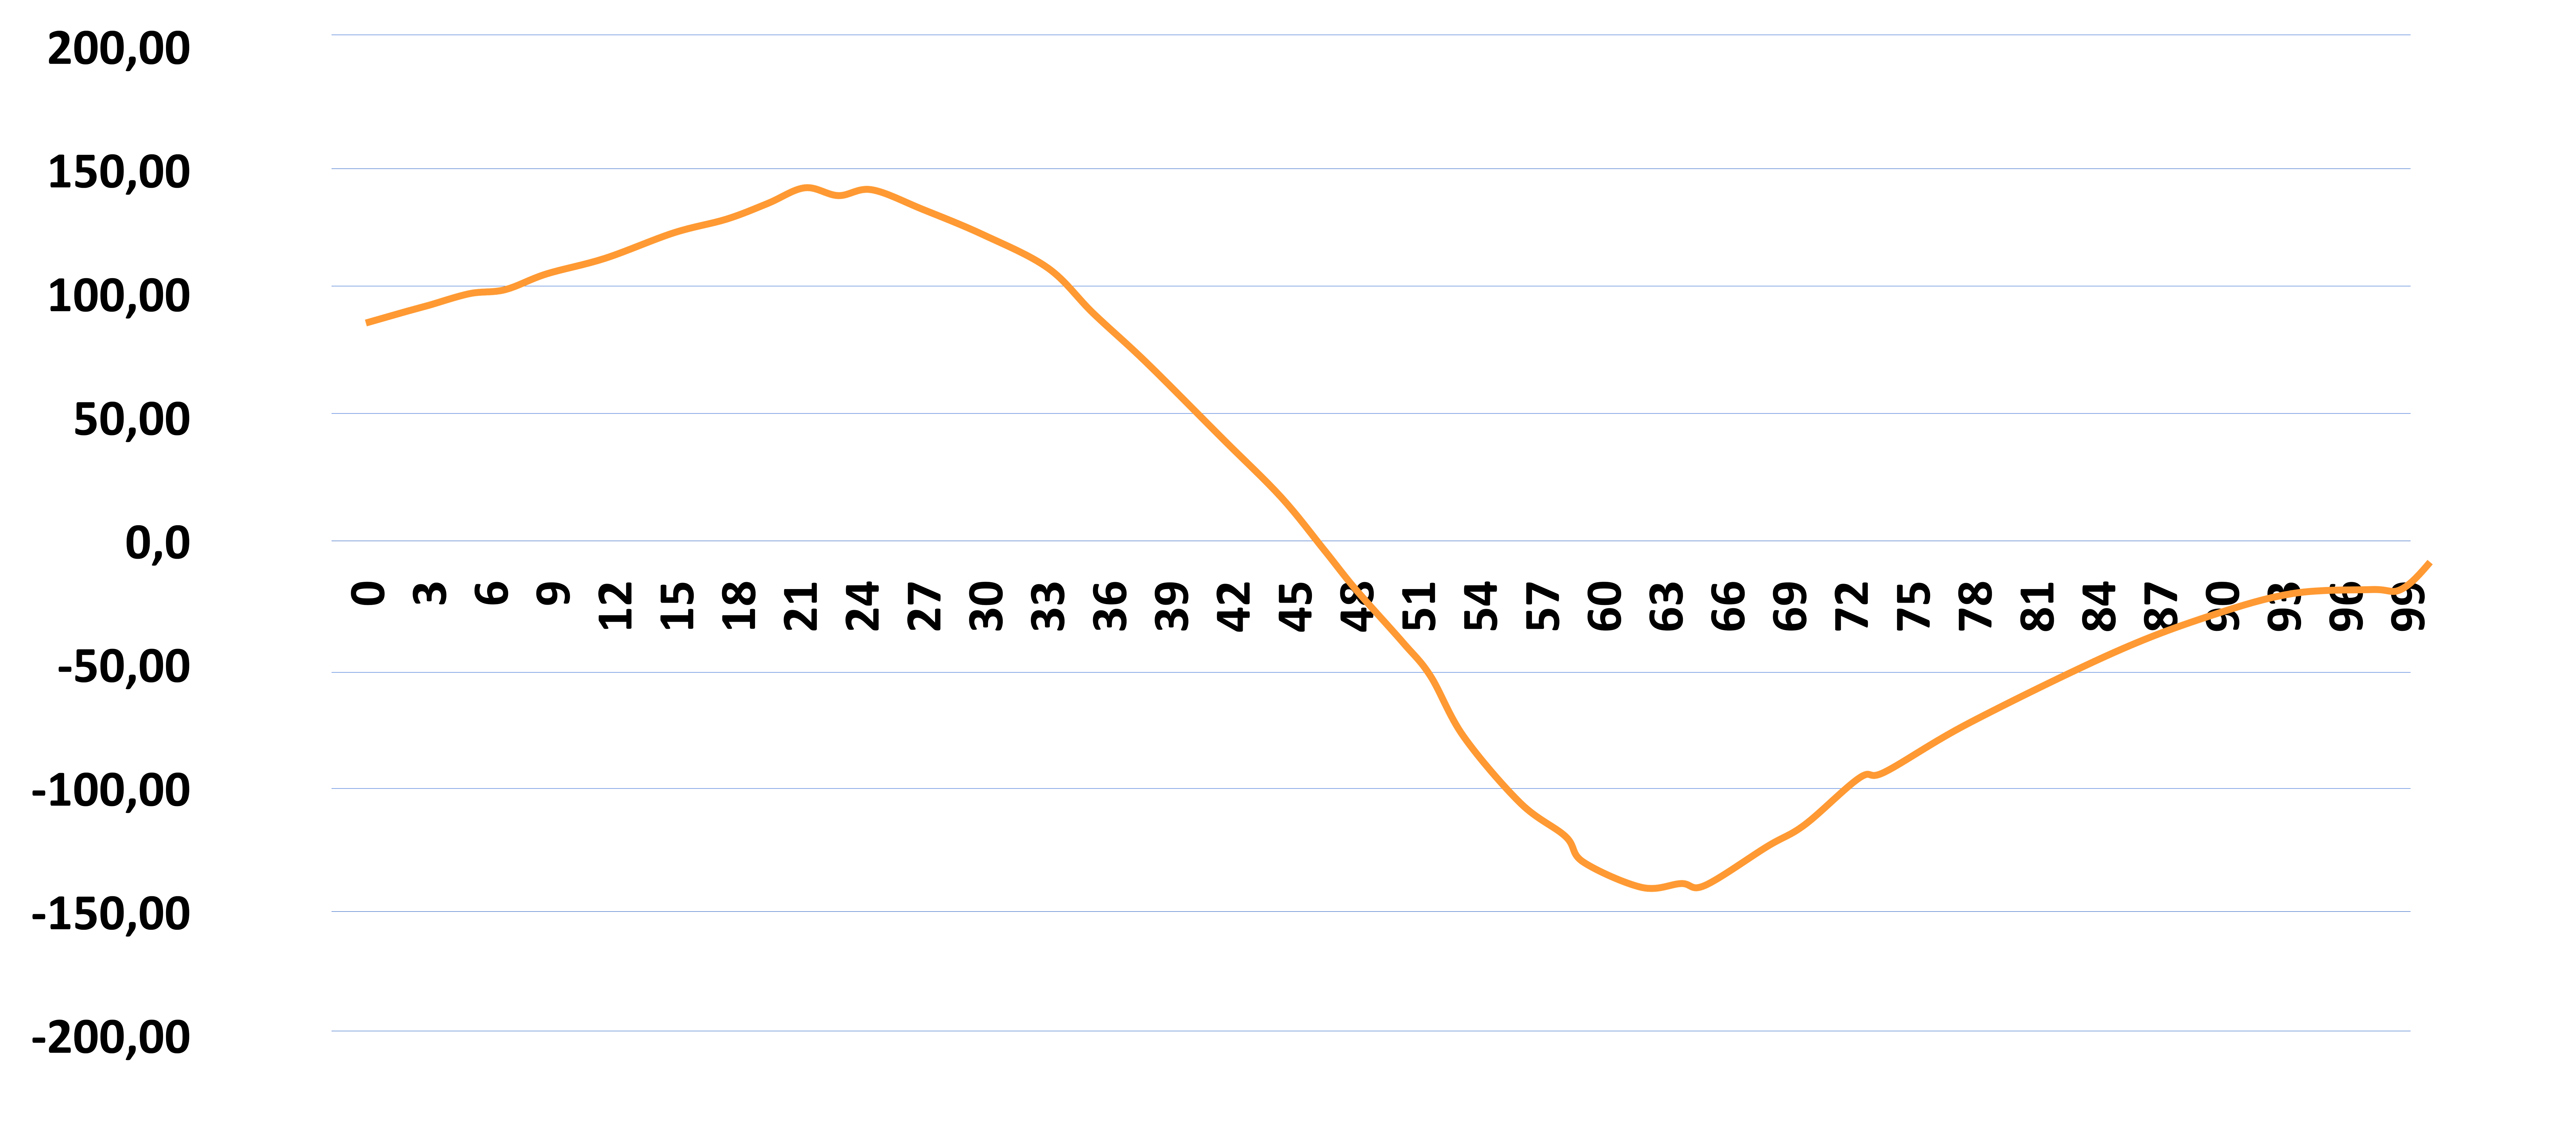 This graph shows the generation account, measured in present dollars, of a representative Portuguese citizen in 2010, depending on their age. Age is measured on the horizontal axis. The generational account can be positive (above the horizontal axis) or negative (below the horizontal axis). The graph shows that newborns had a generational account equal to about $75,000. The GA moves up, peaking in a person's mid-twenties, then slopes down, cutting the horizontal axis at age 46 and bottoming out at about age 63. It then slopes upward again, maxing out and leveling out at about -$20,000 for people ages 93 and older.